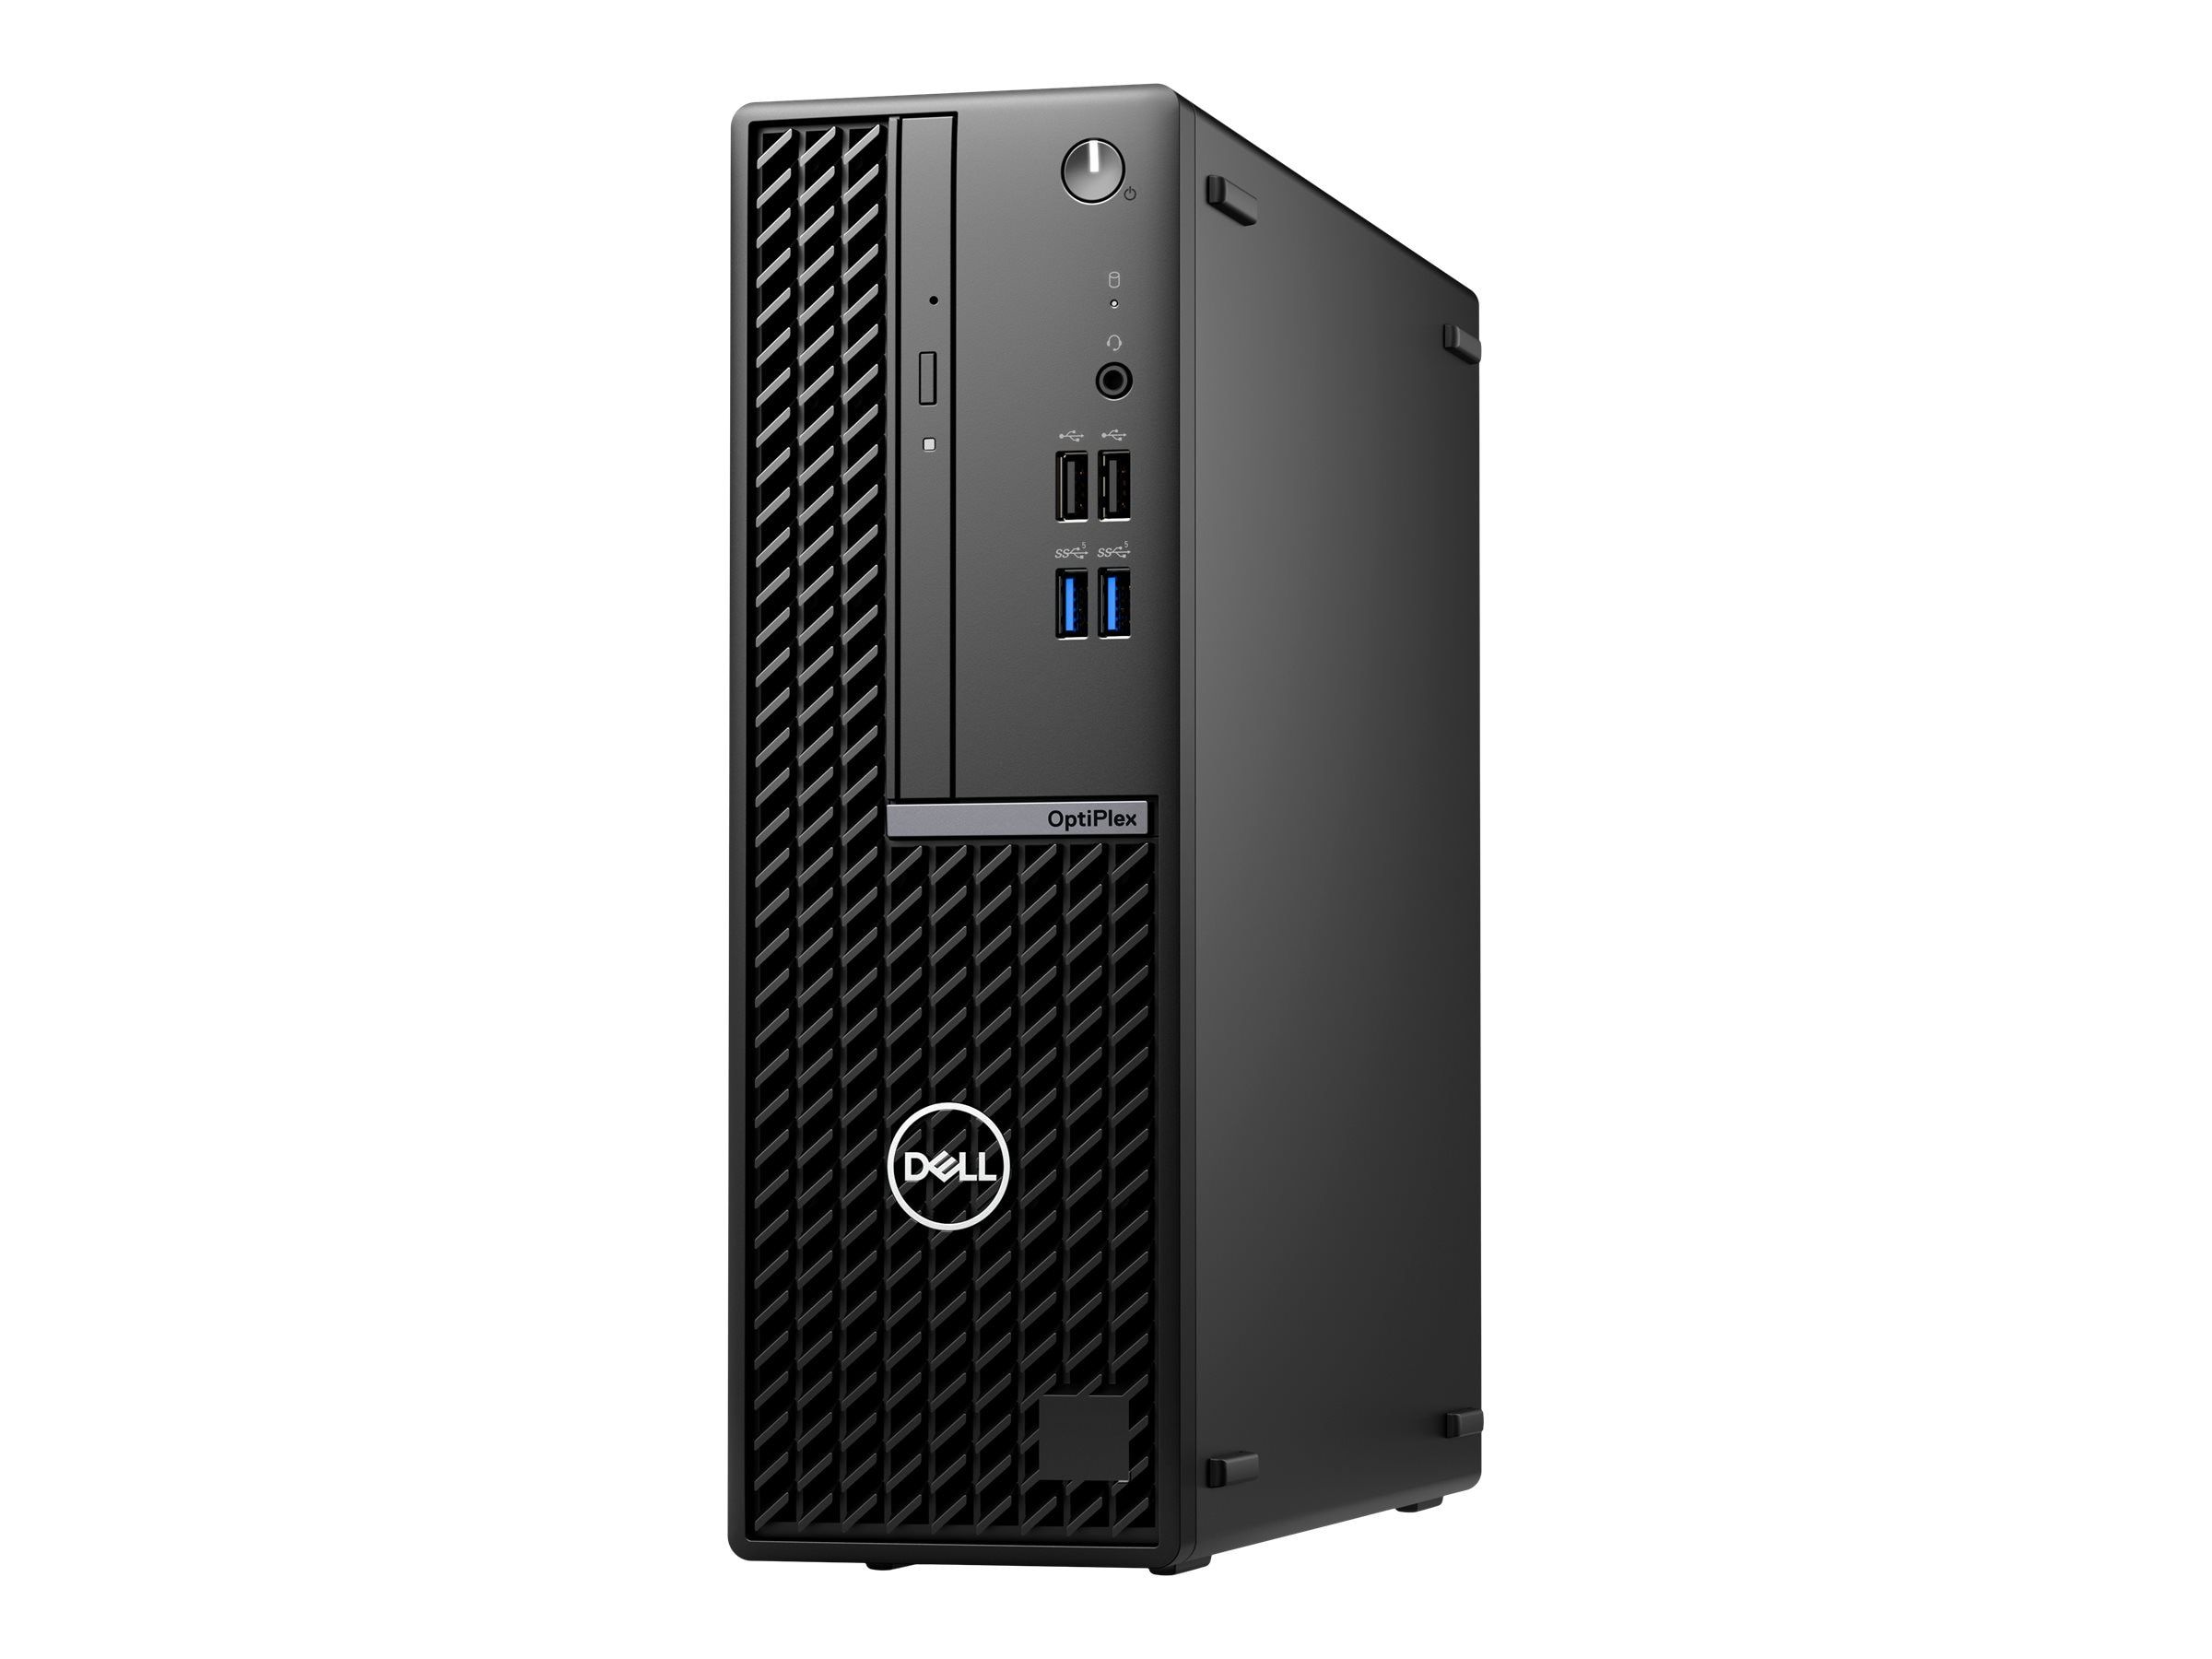 Dell Optiplex 7010 SFF, Intel Core i5-13500(6+8Cores/24MB/20T/2.5GHz to 4.8GHz),16GB(1x16)DDR4,512GB(M.2)NVMe SSD,Intel Integrated Graphics,noWiFi,Dell Optical Mouse - MS116,Dell Wired Keyboard KB216,180W,Ubuntu,3Yr ProSupport_2